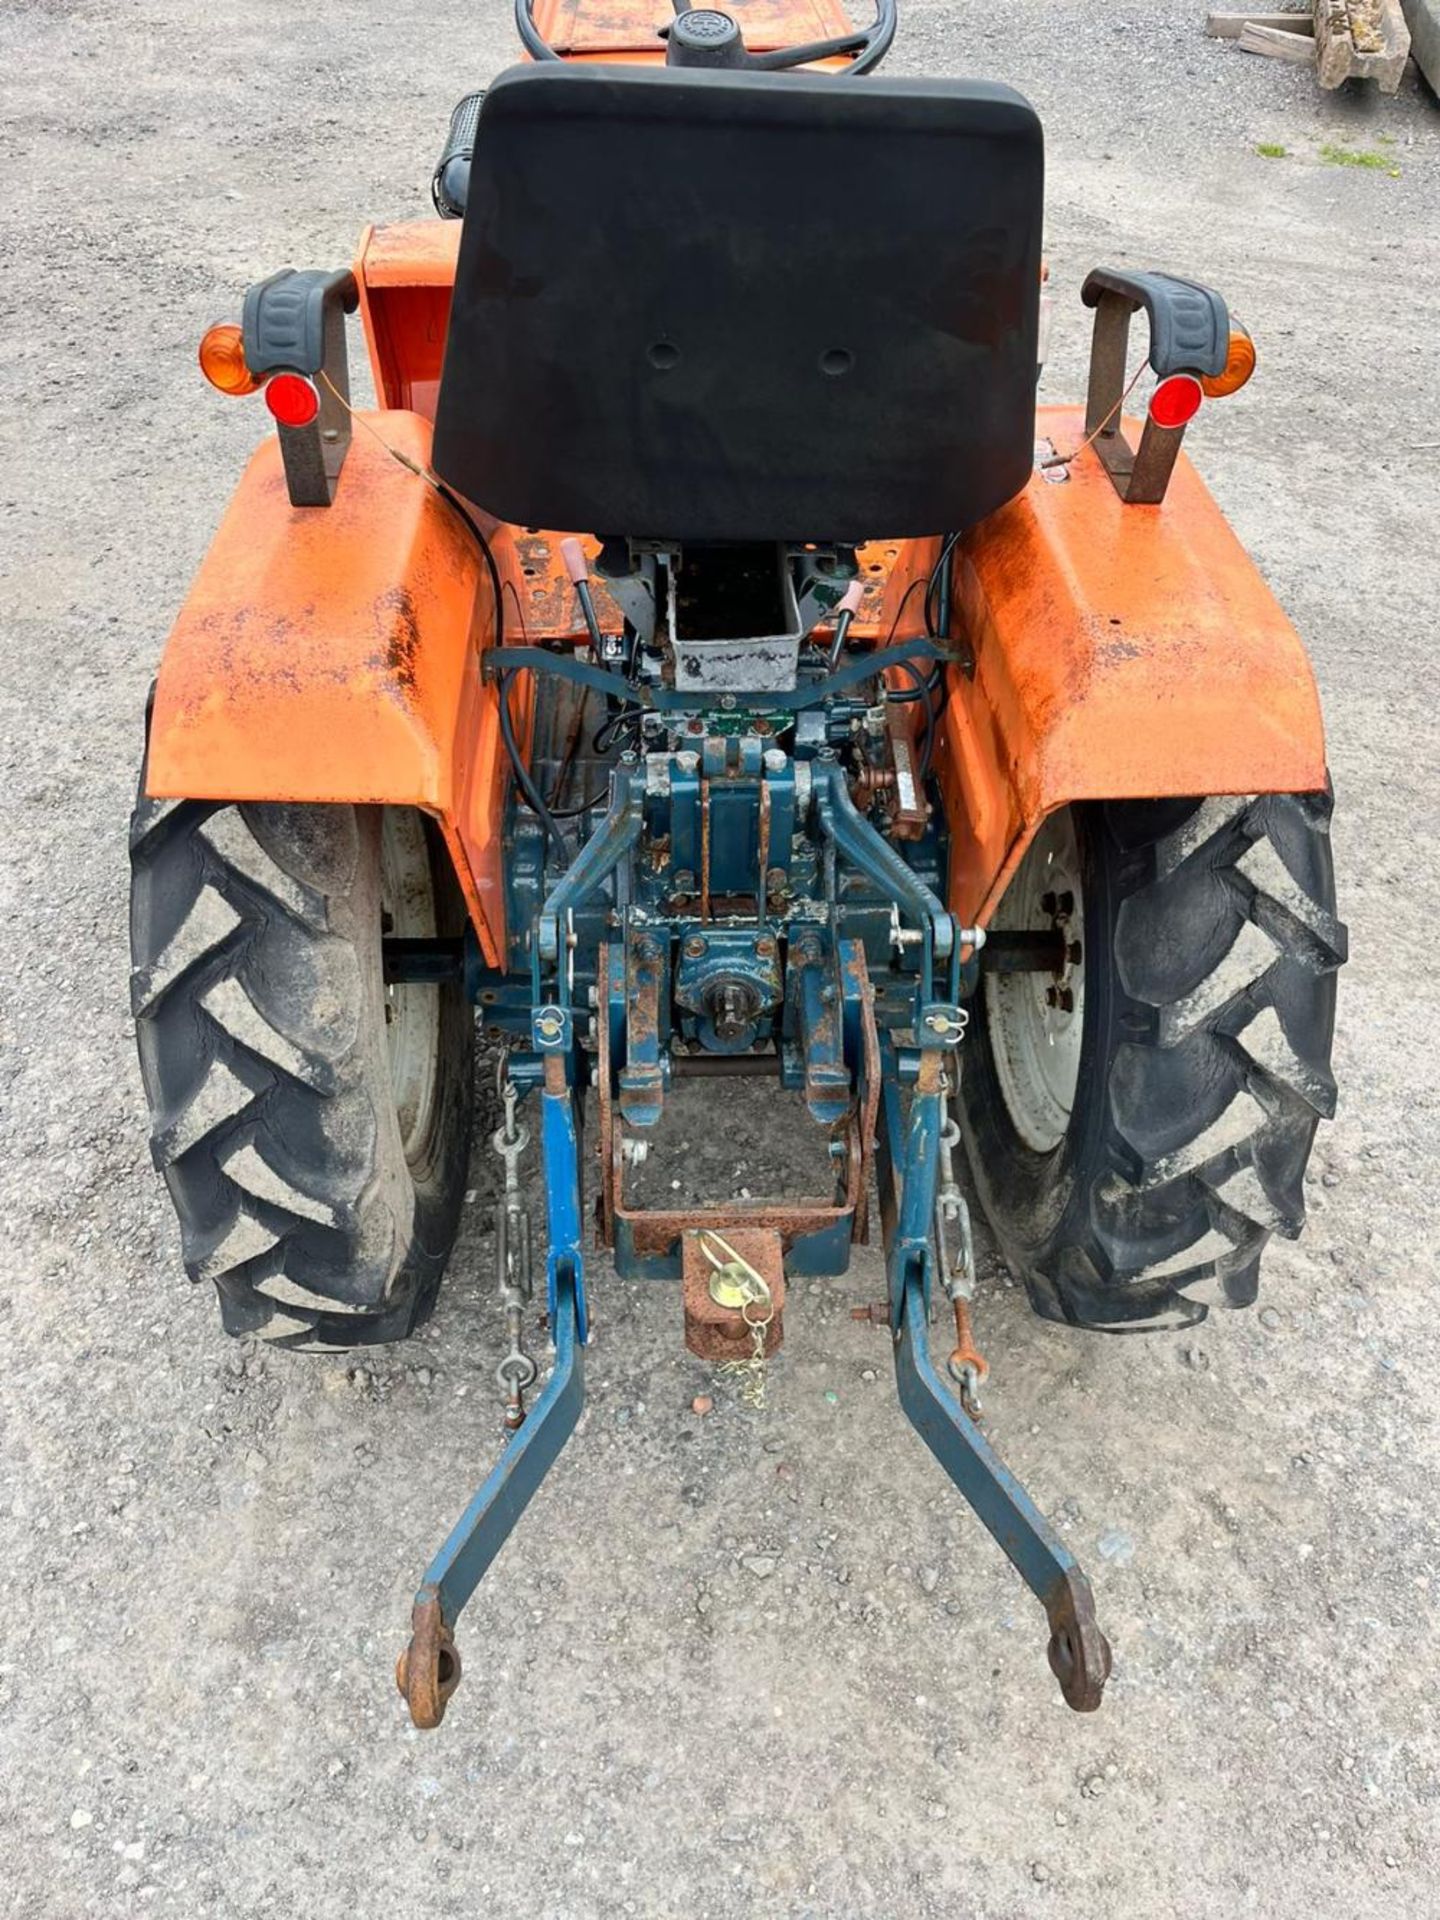 KUBOTA B1400 COMPACT TRACTOR RD PTO TURNS LINK ARMS UP & DOWN - Image 4 of 14